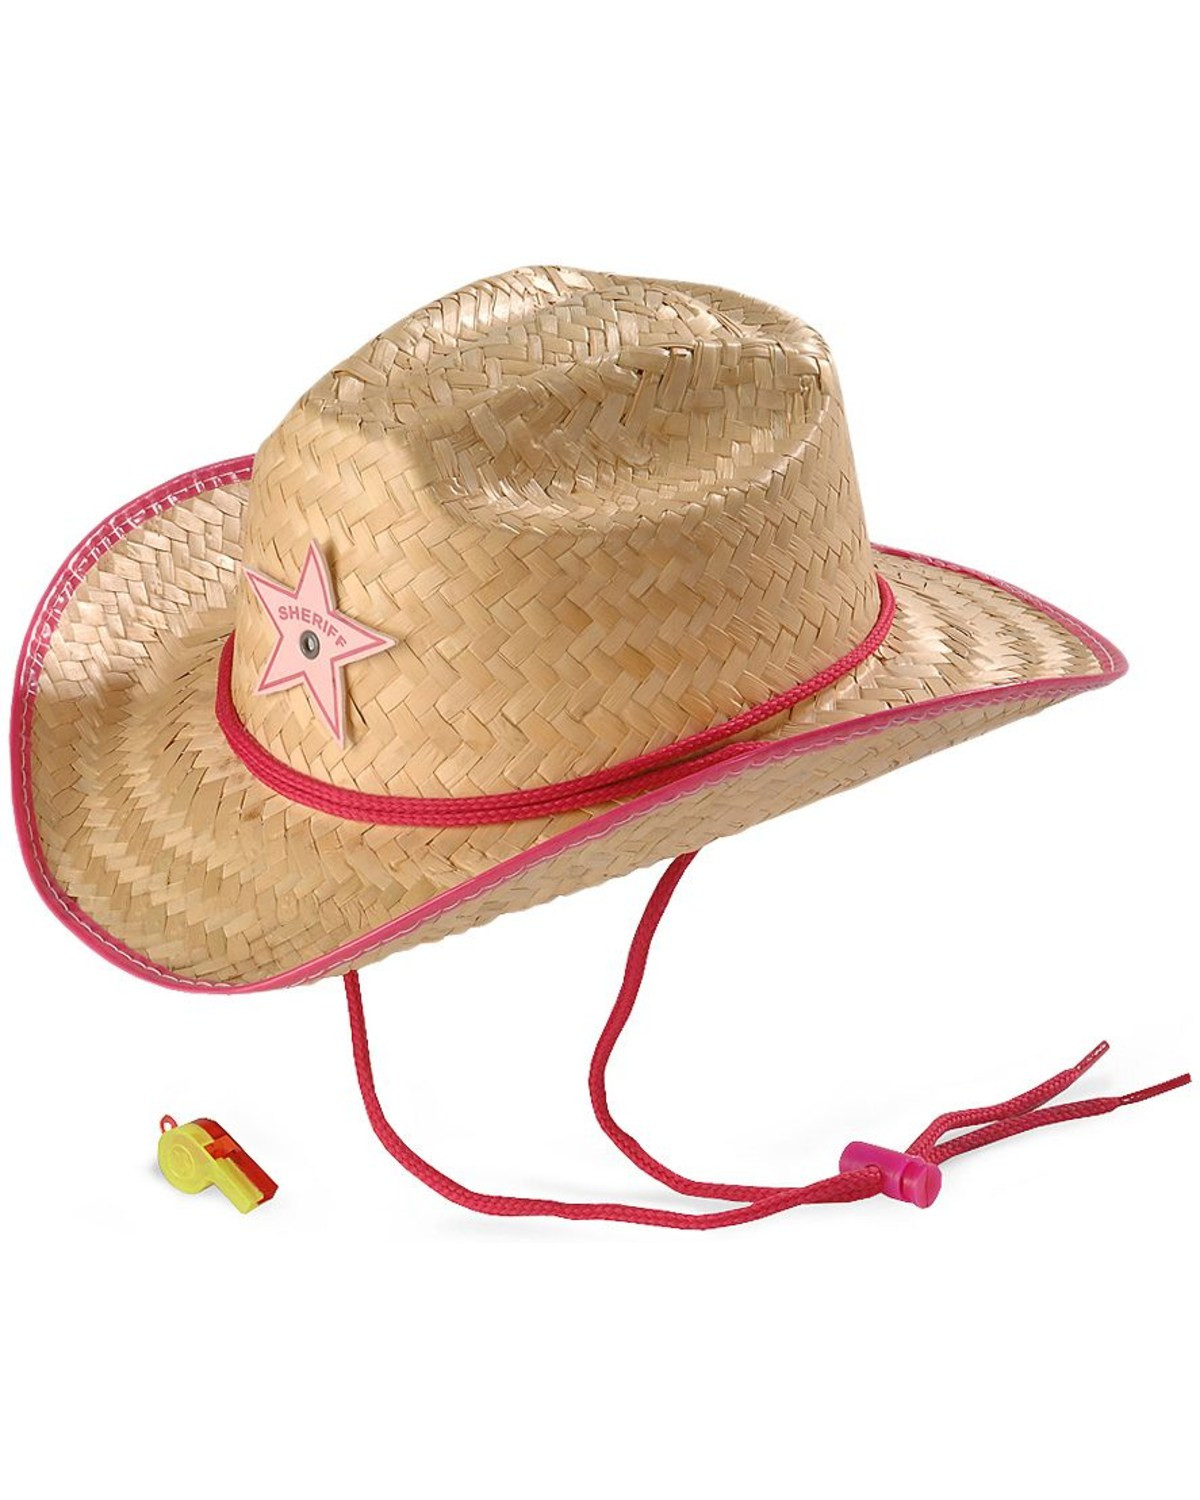 Kids Cowboy Hats Party
 Children s Rodeo Party Sheriff Straw Cowboy Hat & Whistle